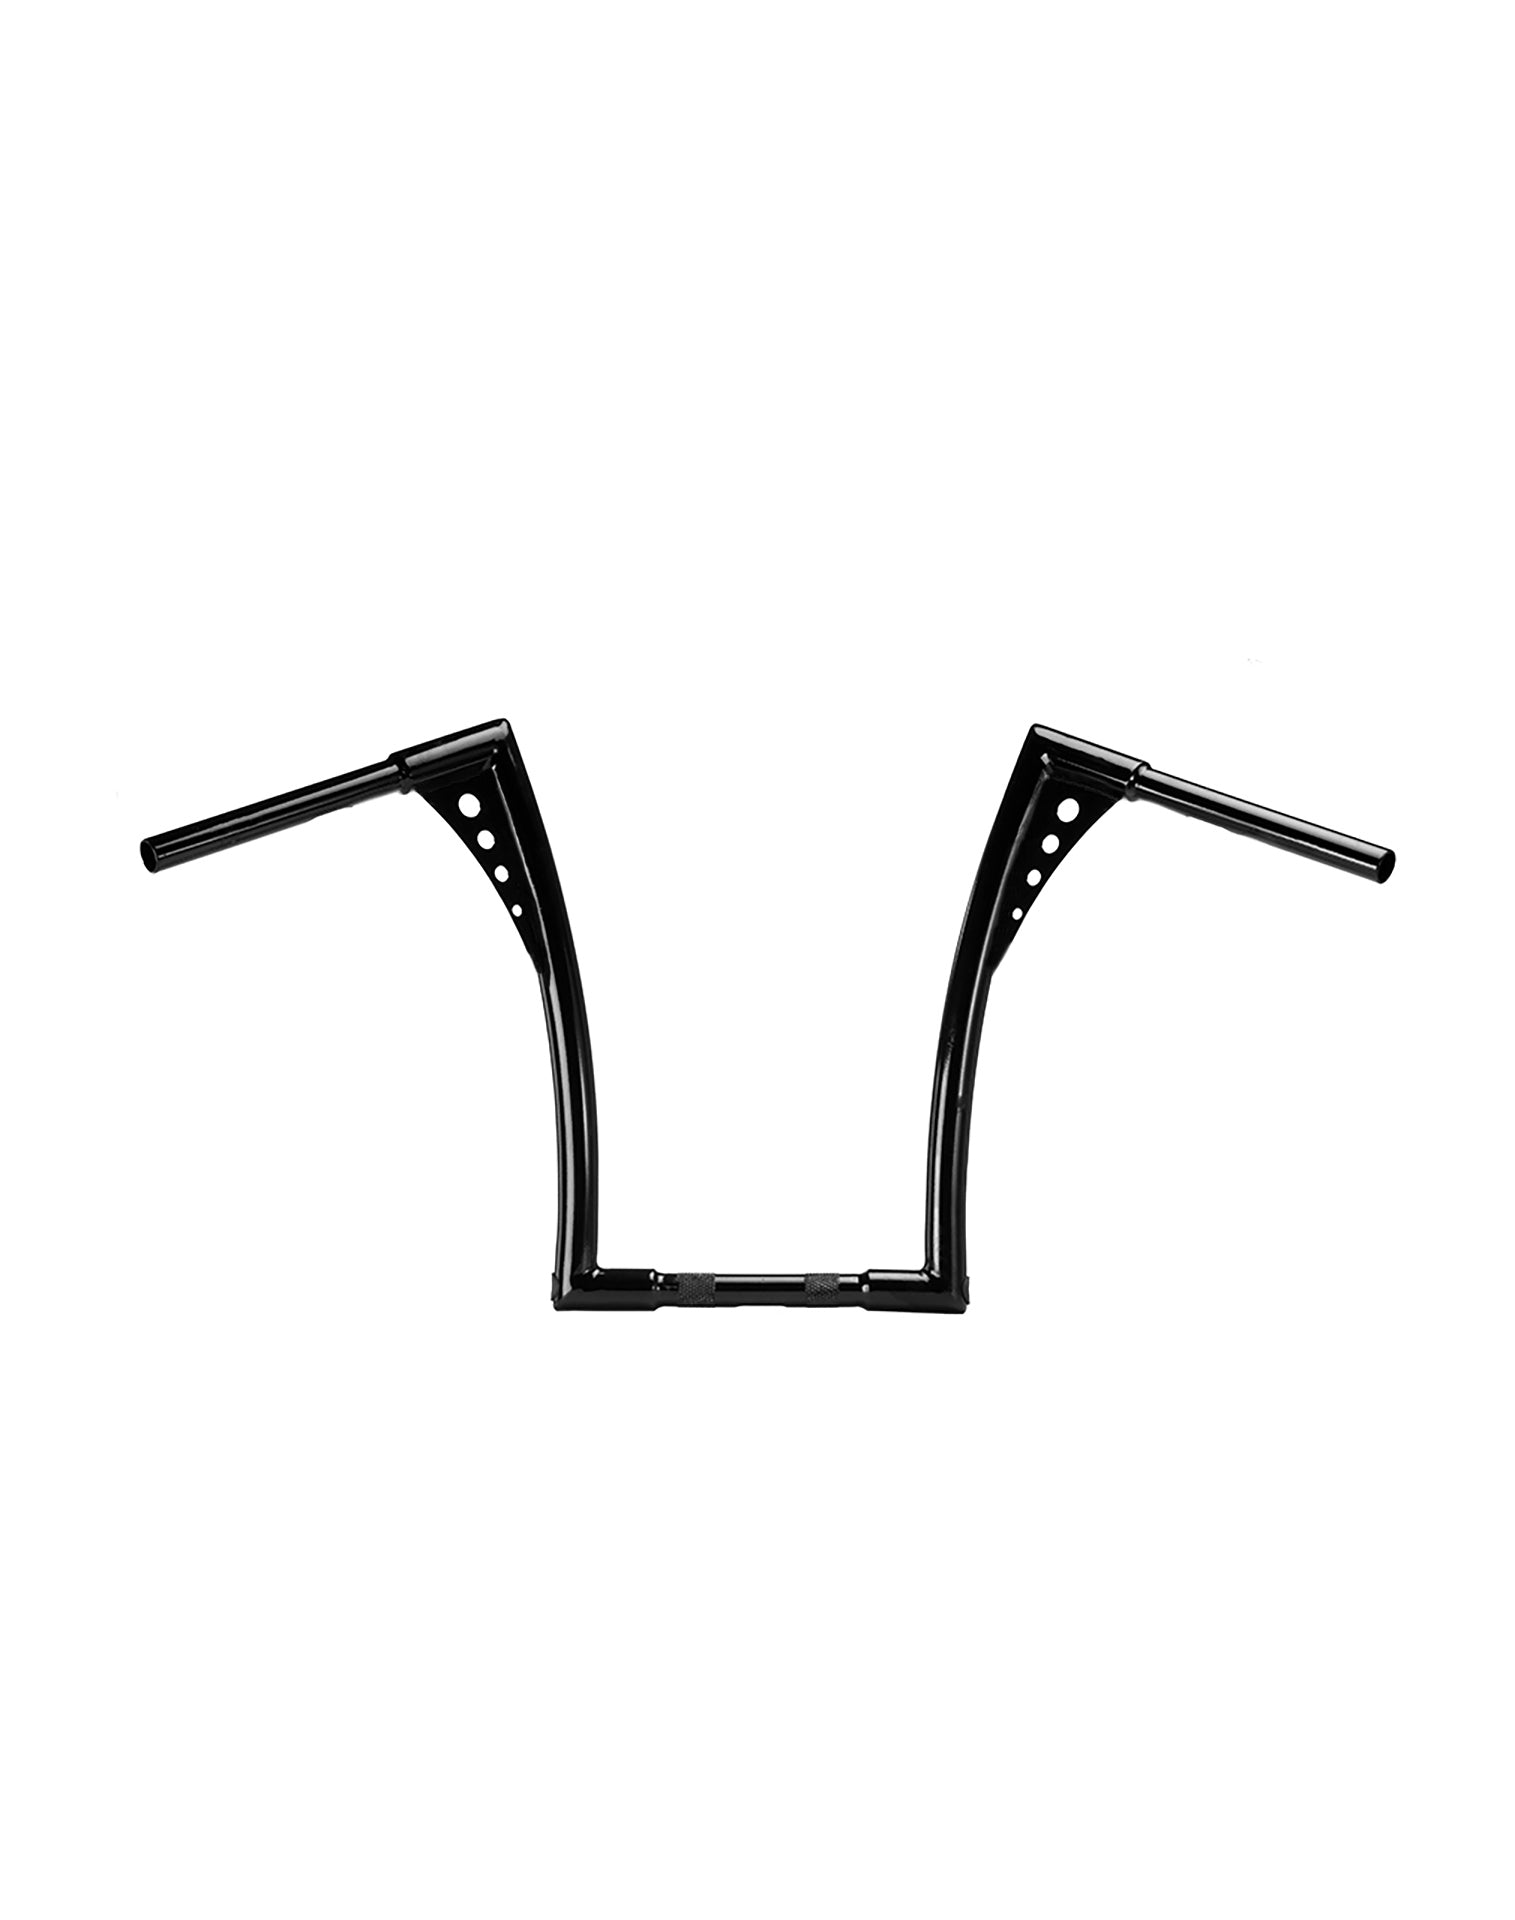 Viking Iron Born 12" Handlebar For Harley Dyna Low Rider FXDL Gloss Black Back Side View